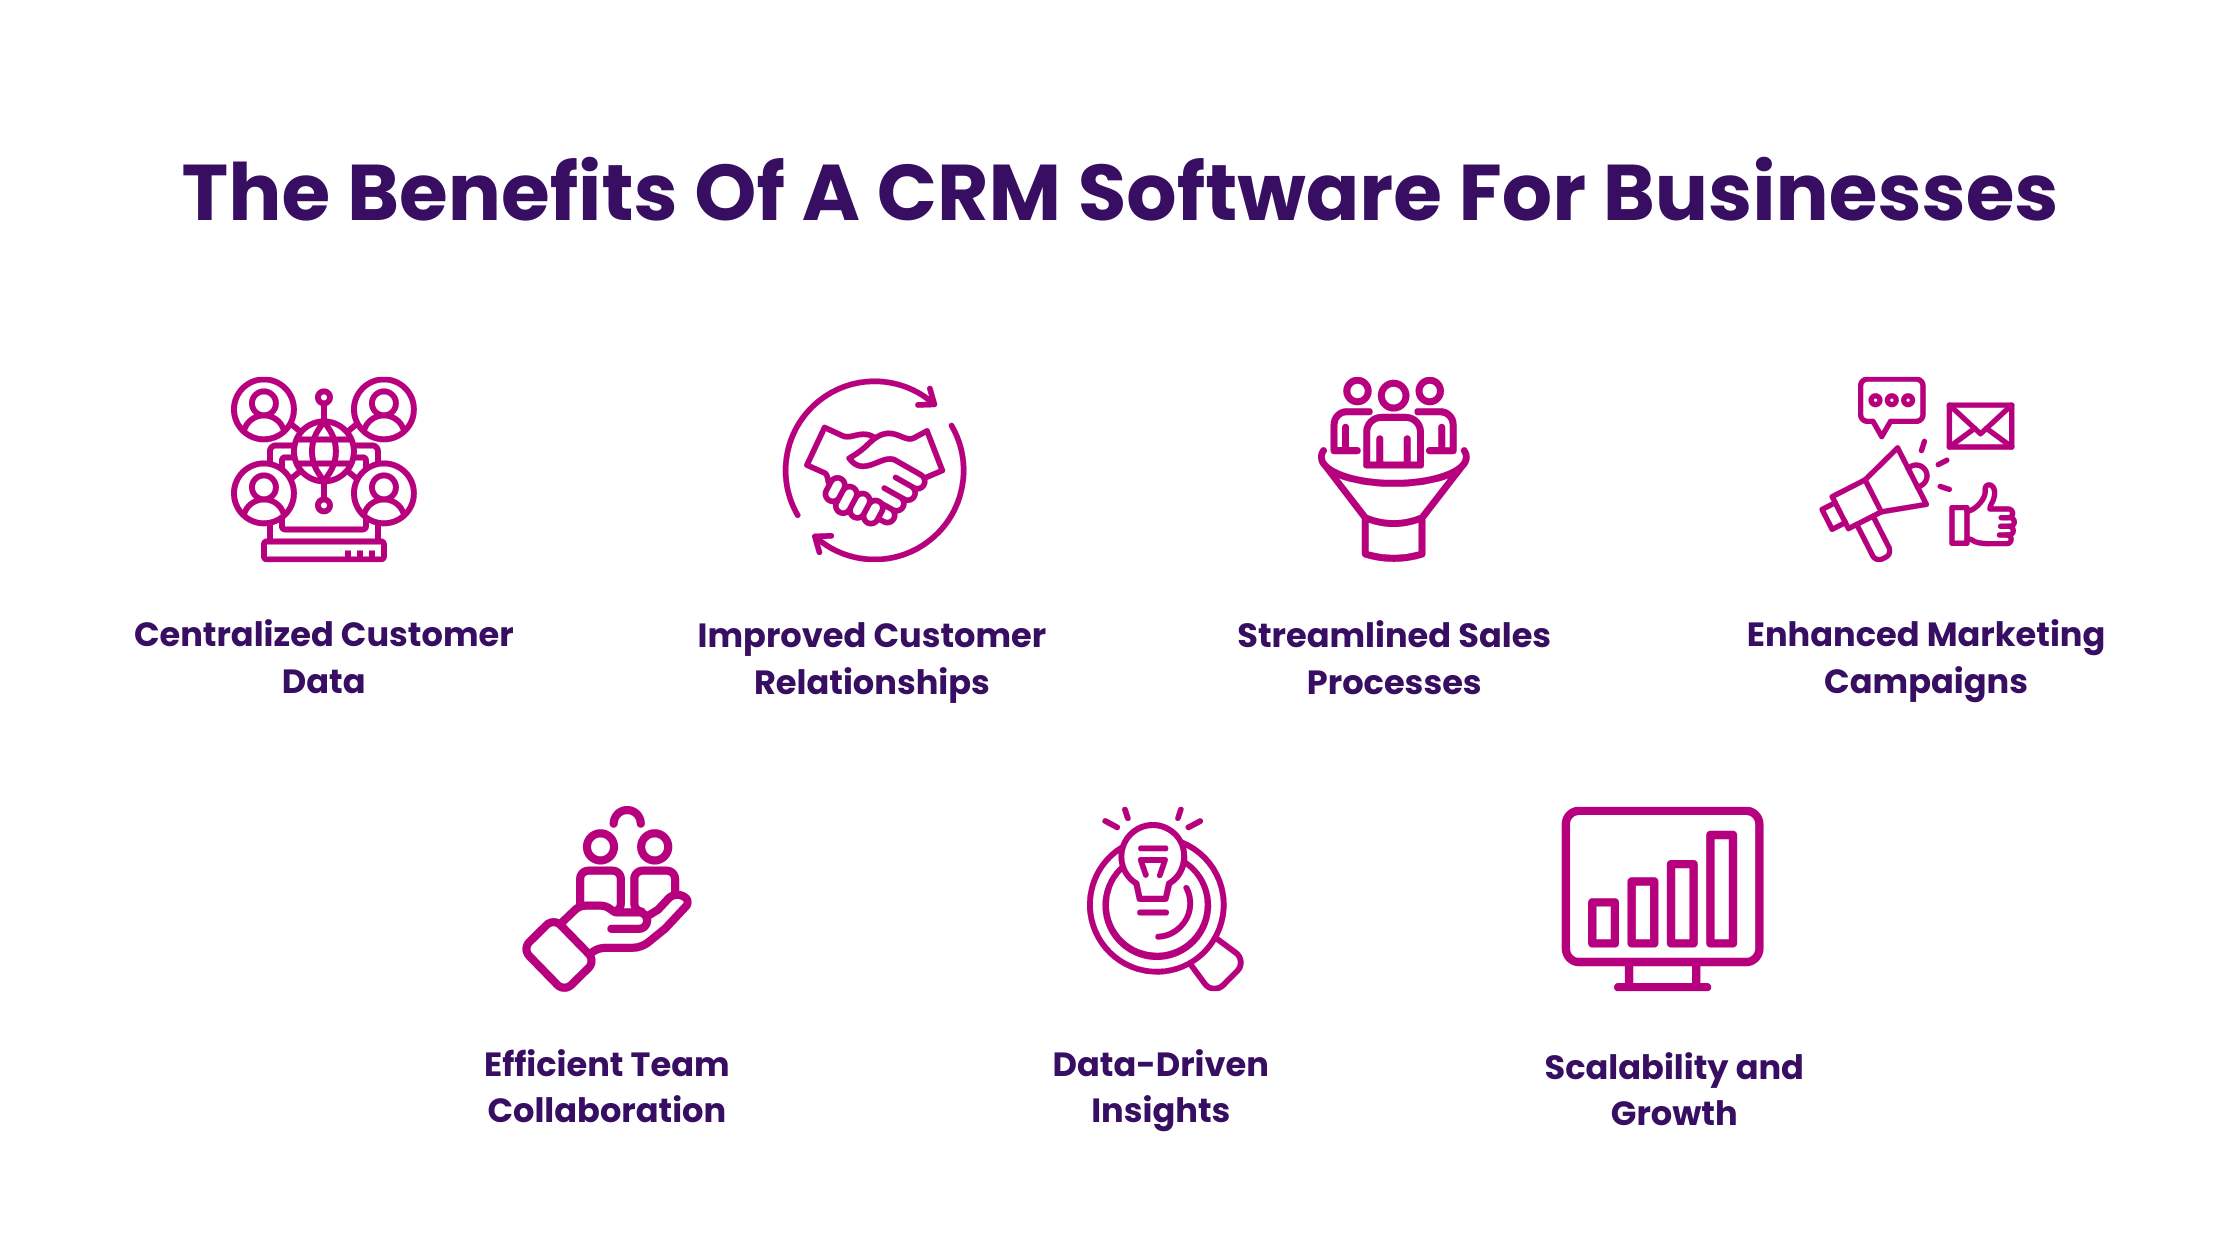 The Benefits Of A CRM Software For Businesses 2